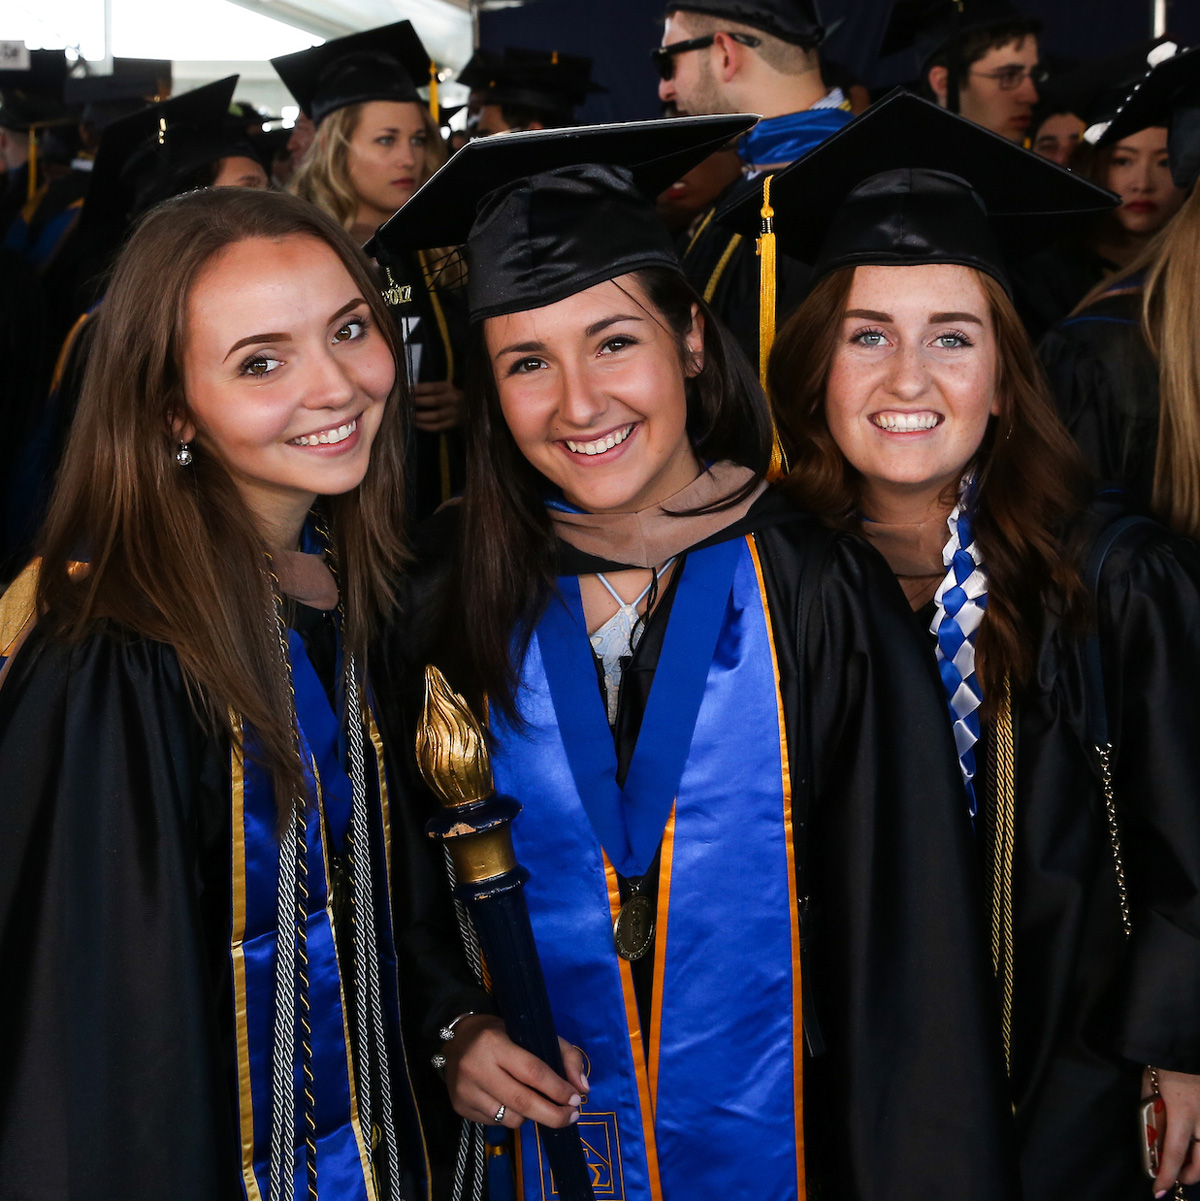 Sydney Fonseca carrying the Suffolk torch and posing in her cap and gown with classmates before Commencement.